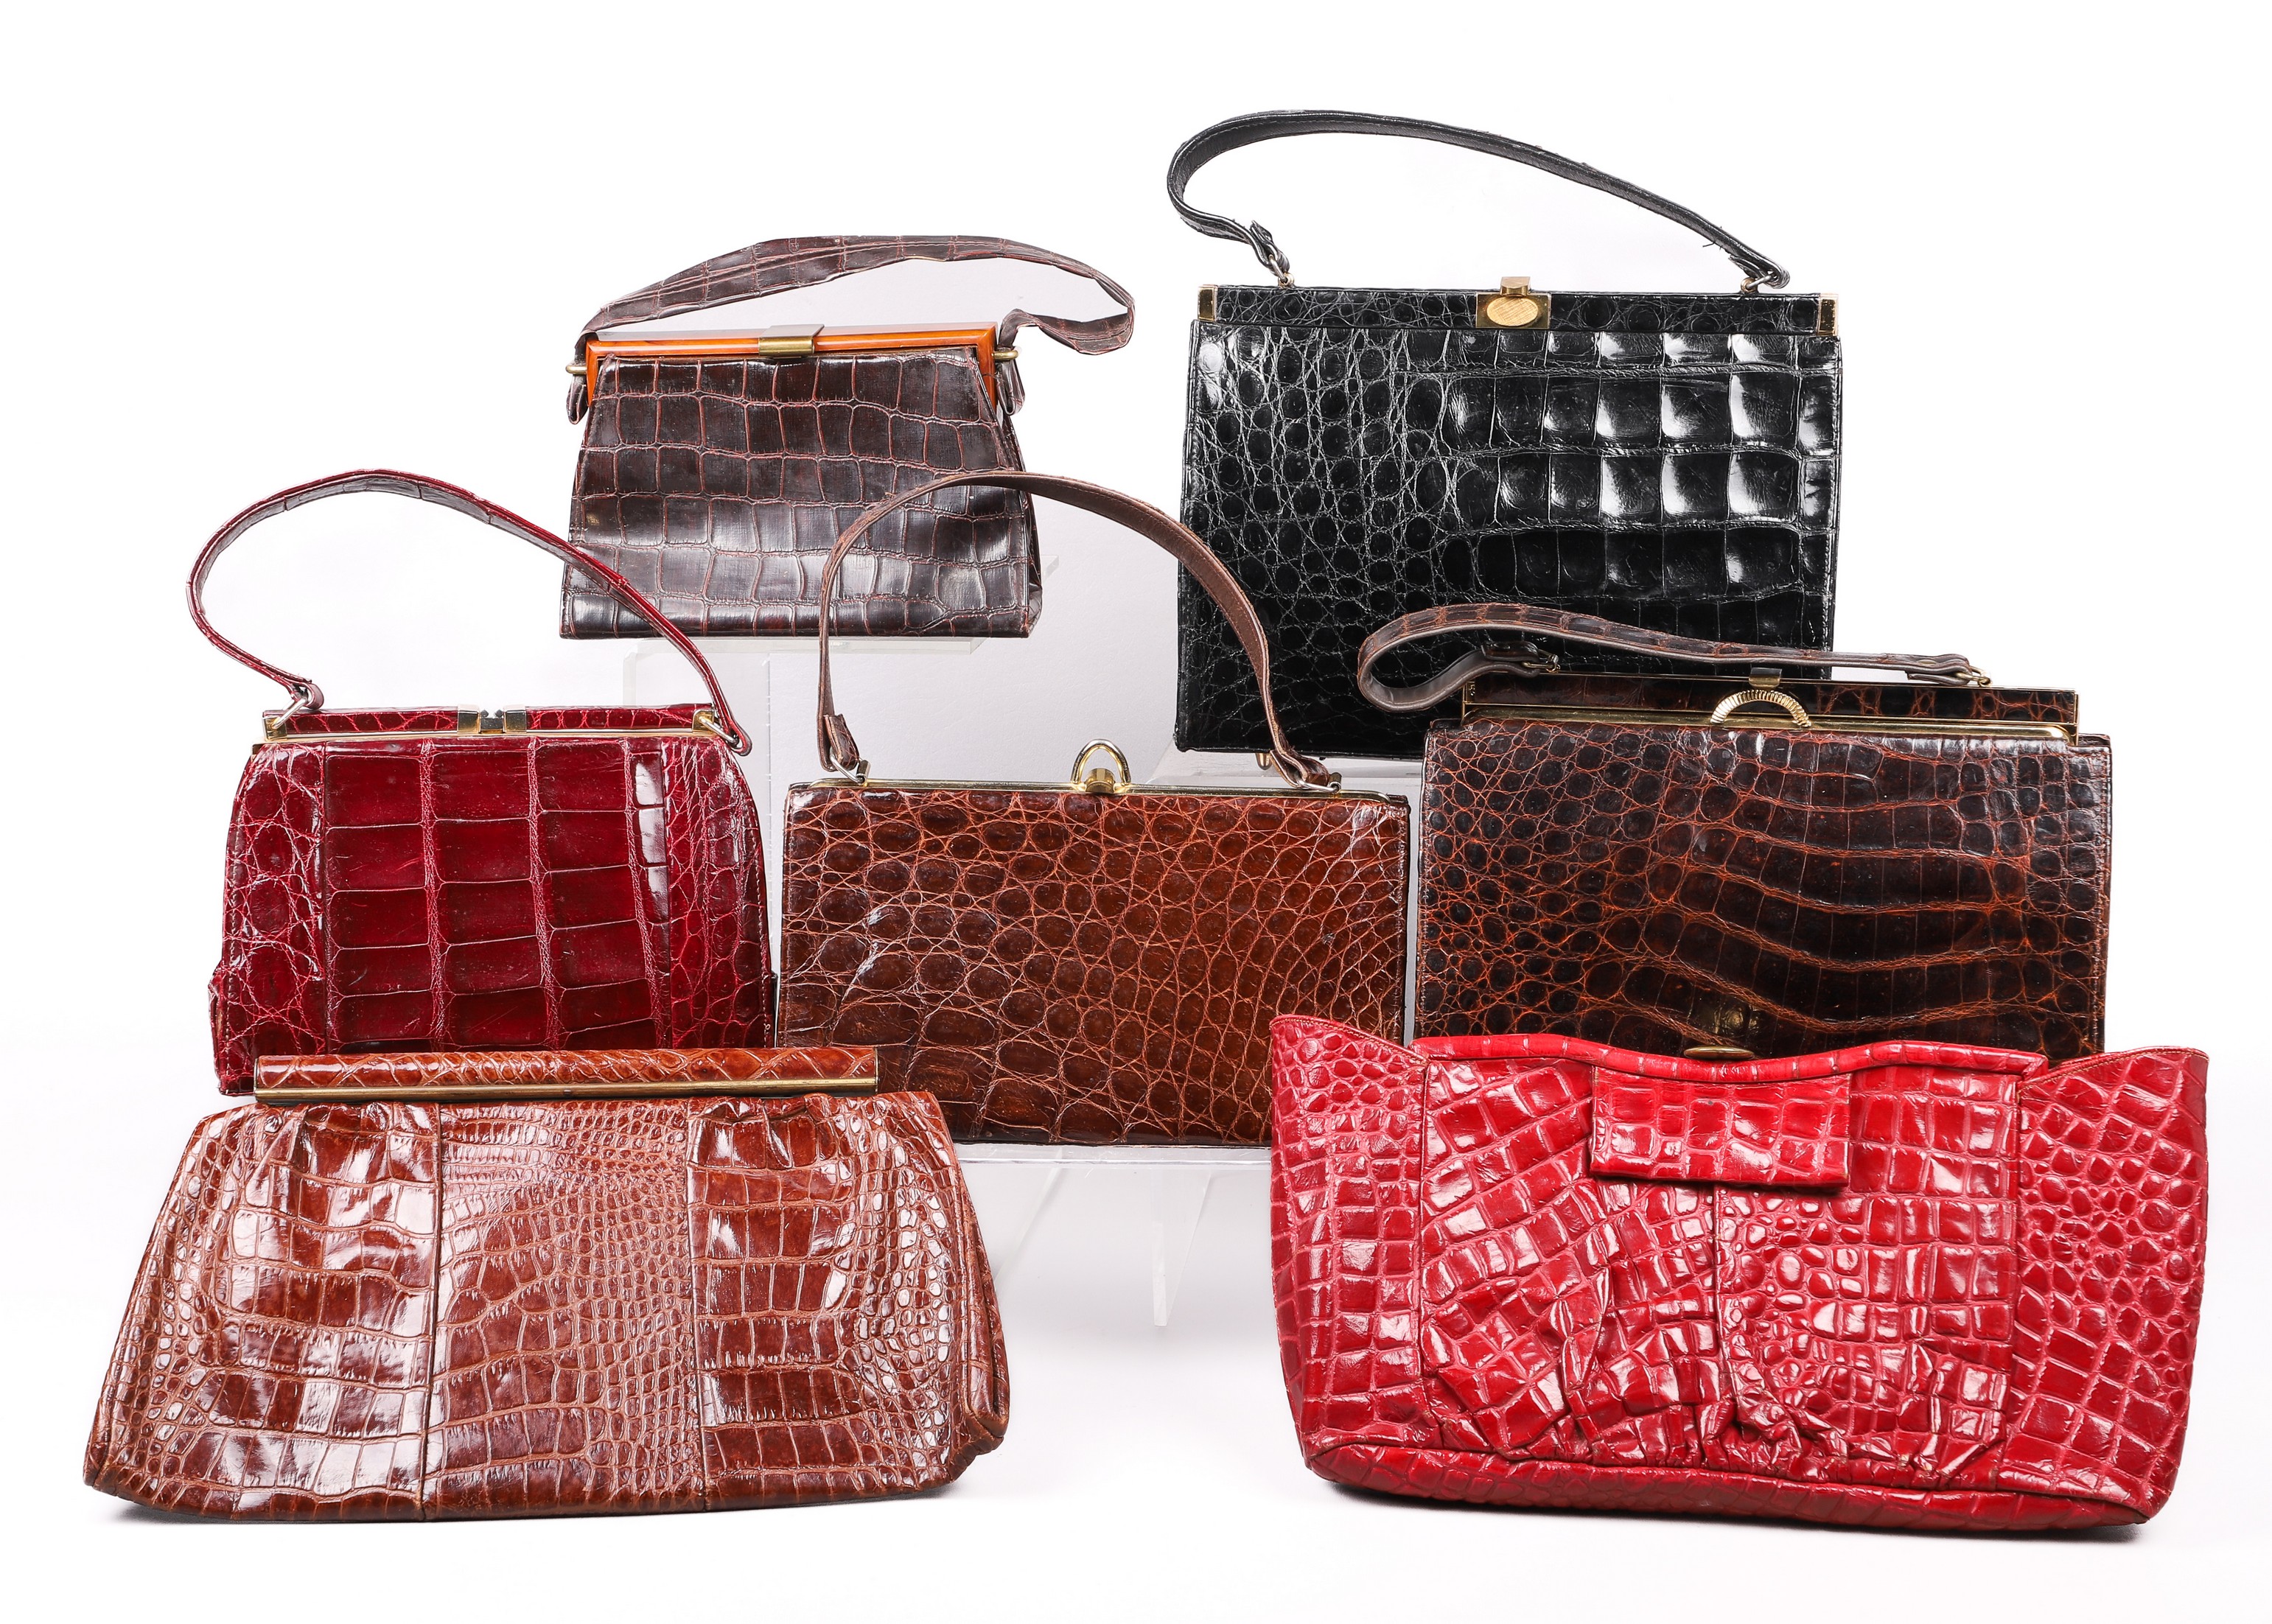 Reptile skin and style purse group 27a6b6